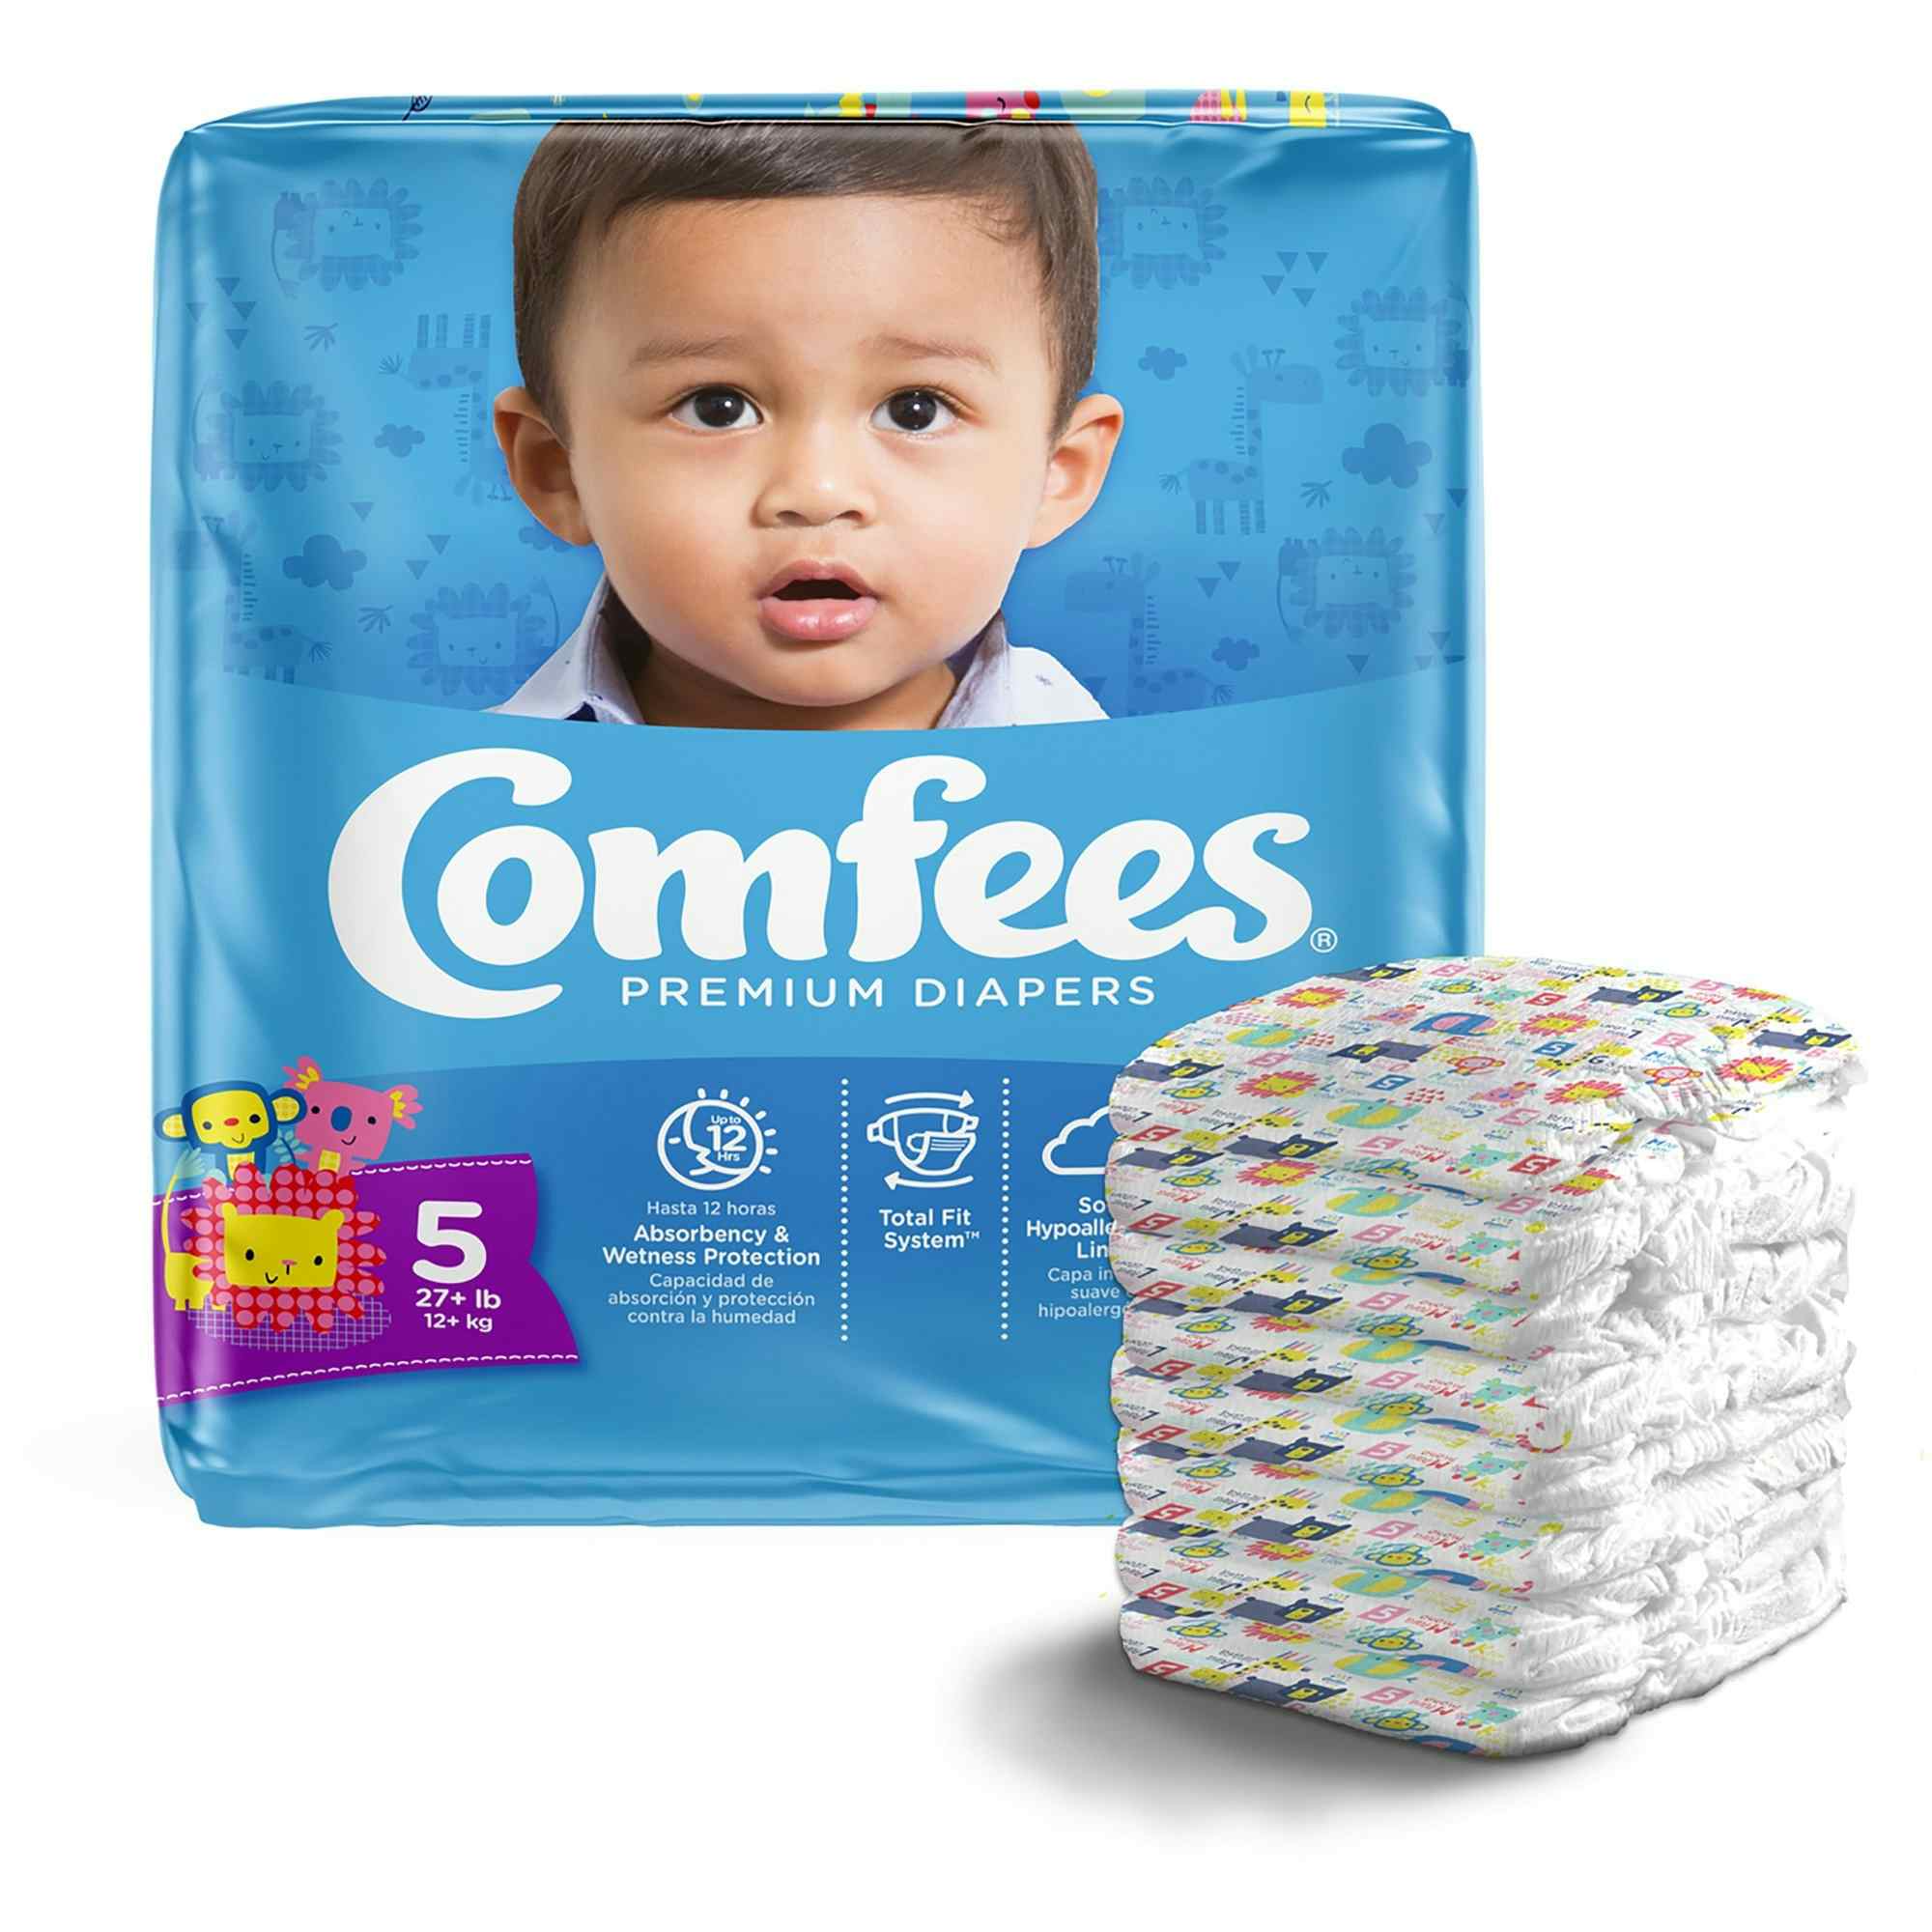 Comfees Premium Baby Diapers, Moderate Absorbency, CMF-5, Size 5 (Over 27 lbs.) - Case of 4 (4 Bags)